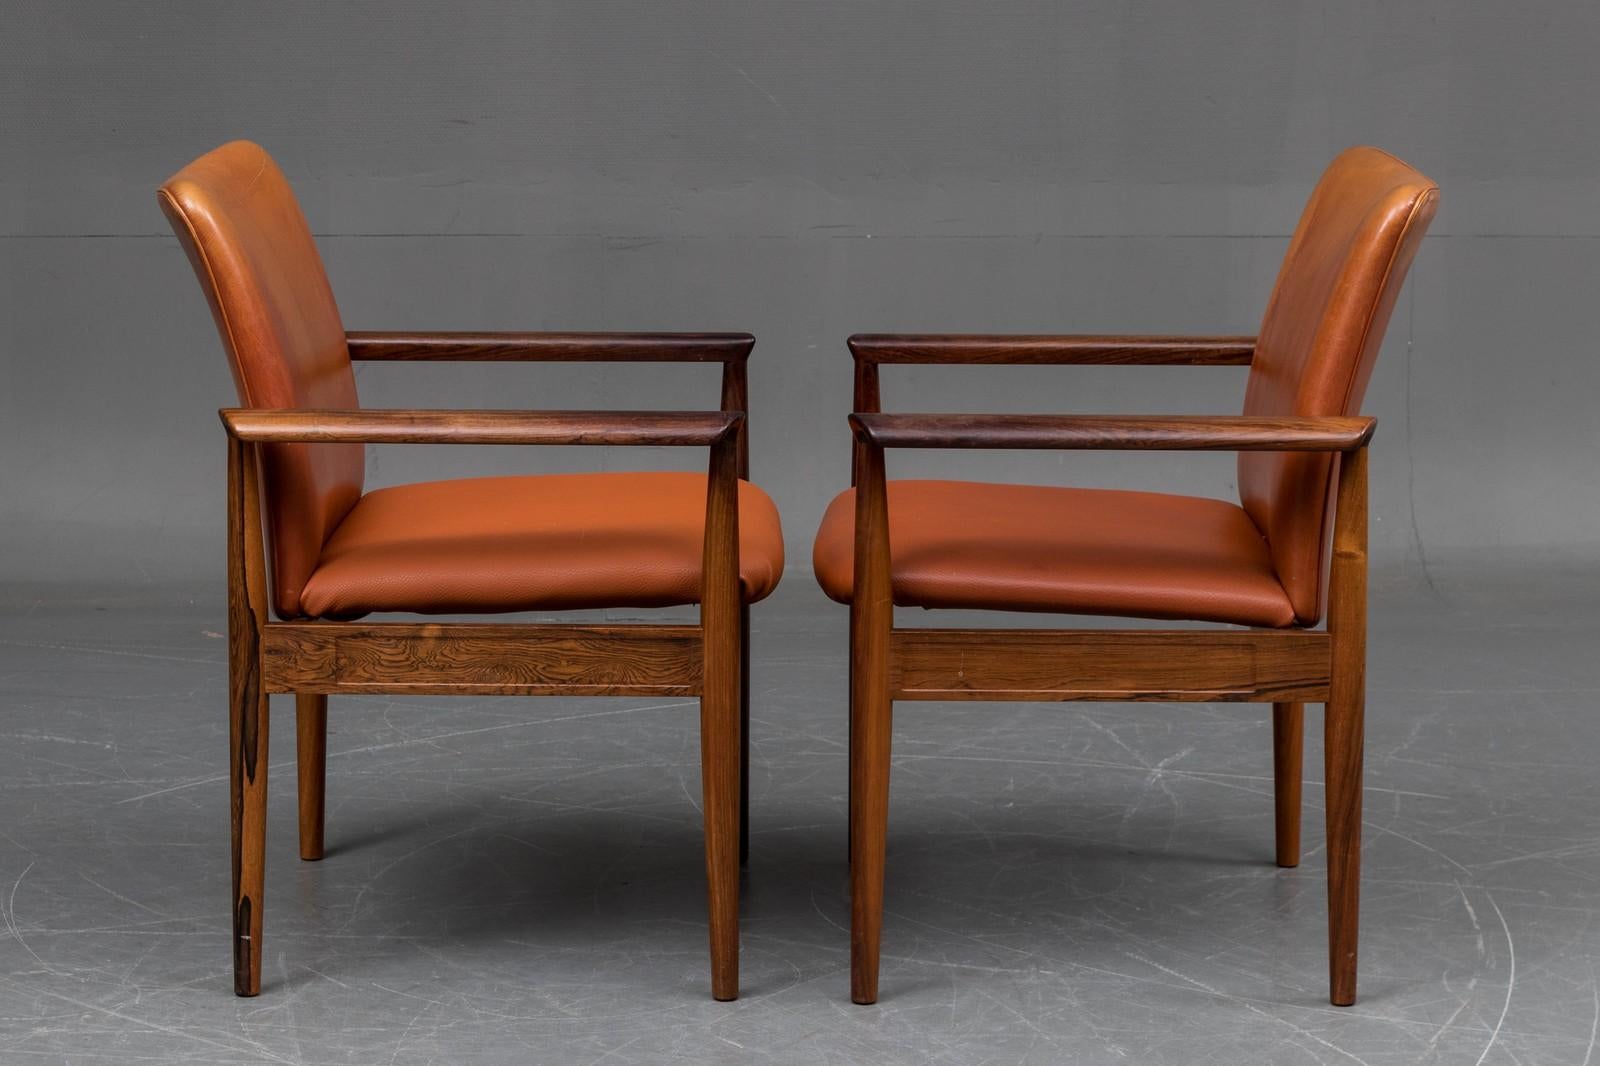 Finn Juhl, diplomat desk chair or armchair with frame in solid rosewood, new seat upholstery and cover, model 209. Designed in 1963. Produced by France & Son.
Measures: H. 82 cm, SH. 44 cm, B. 69 cm.
Used but still in perfect condition.
   